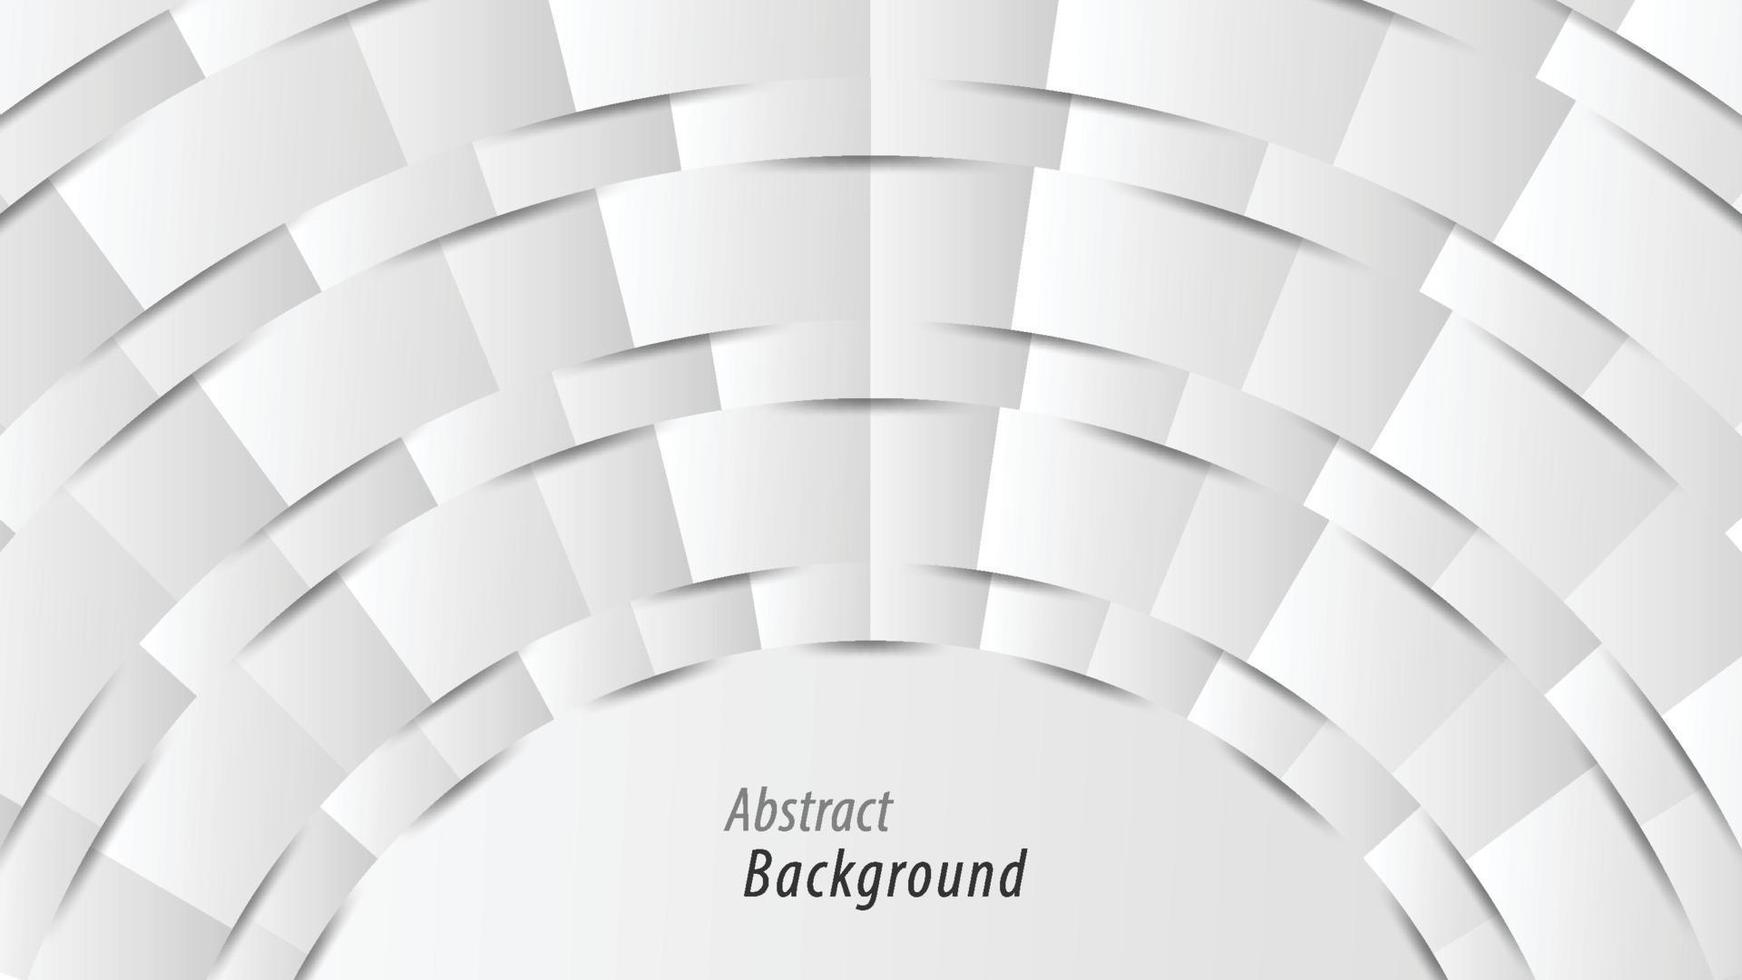 White abstract background. vector silver background for cover, book, banner, web page, poster, card, advertisement, brochure, flyer, catalog, leaflet, ads, annual report, decorate wall